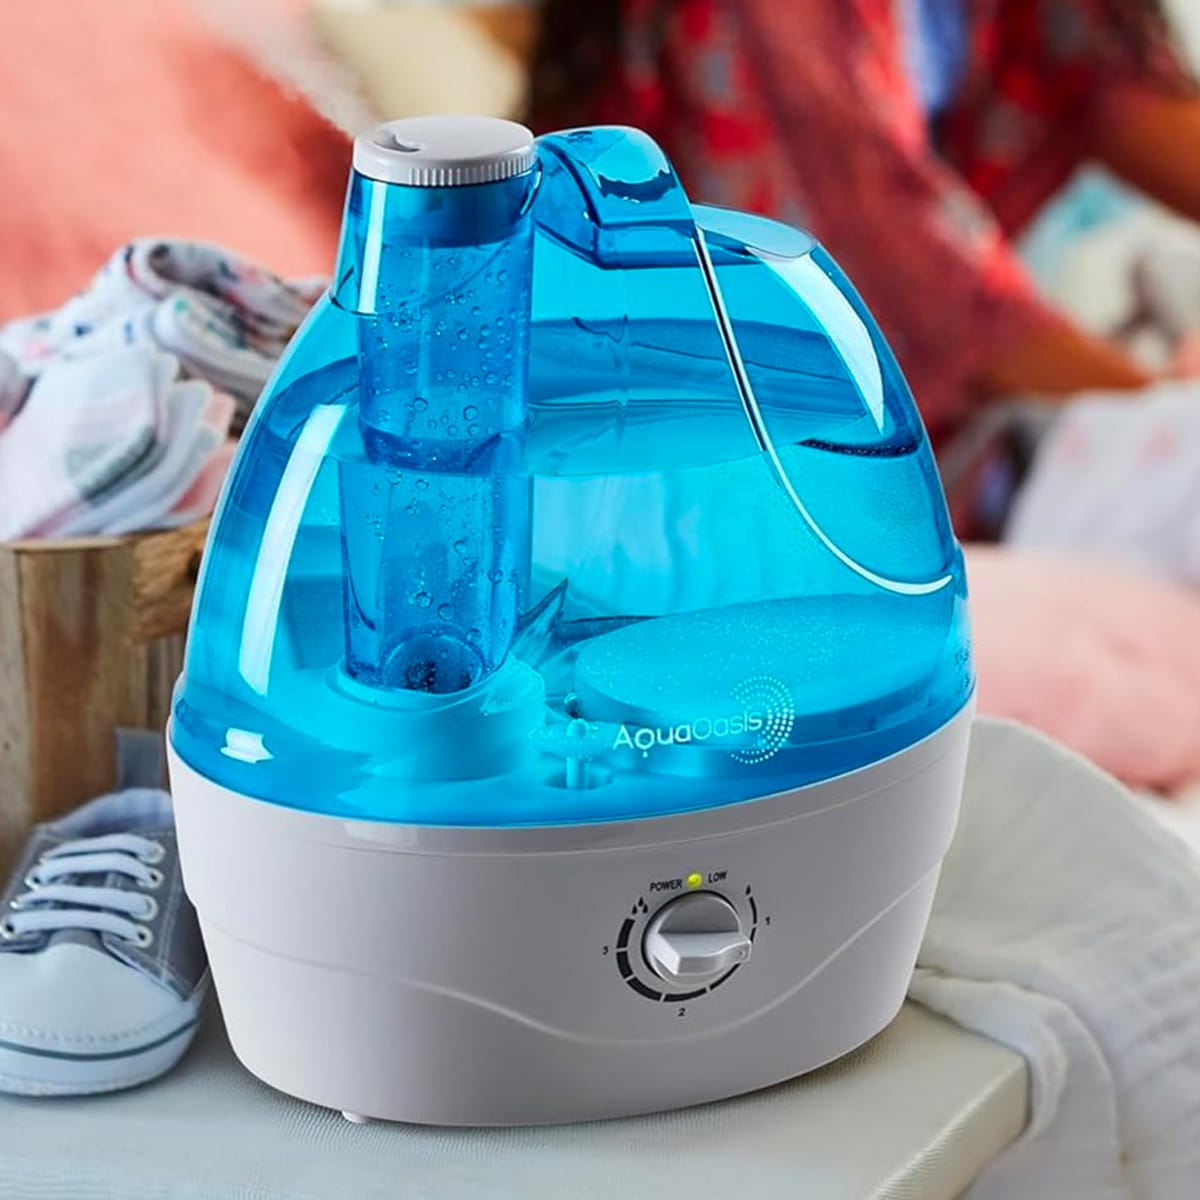 The AquaOasis Humidifier is 40% off at Amazon before Black Friday 